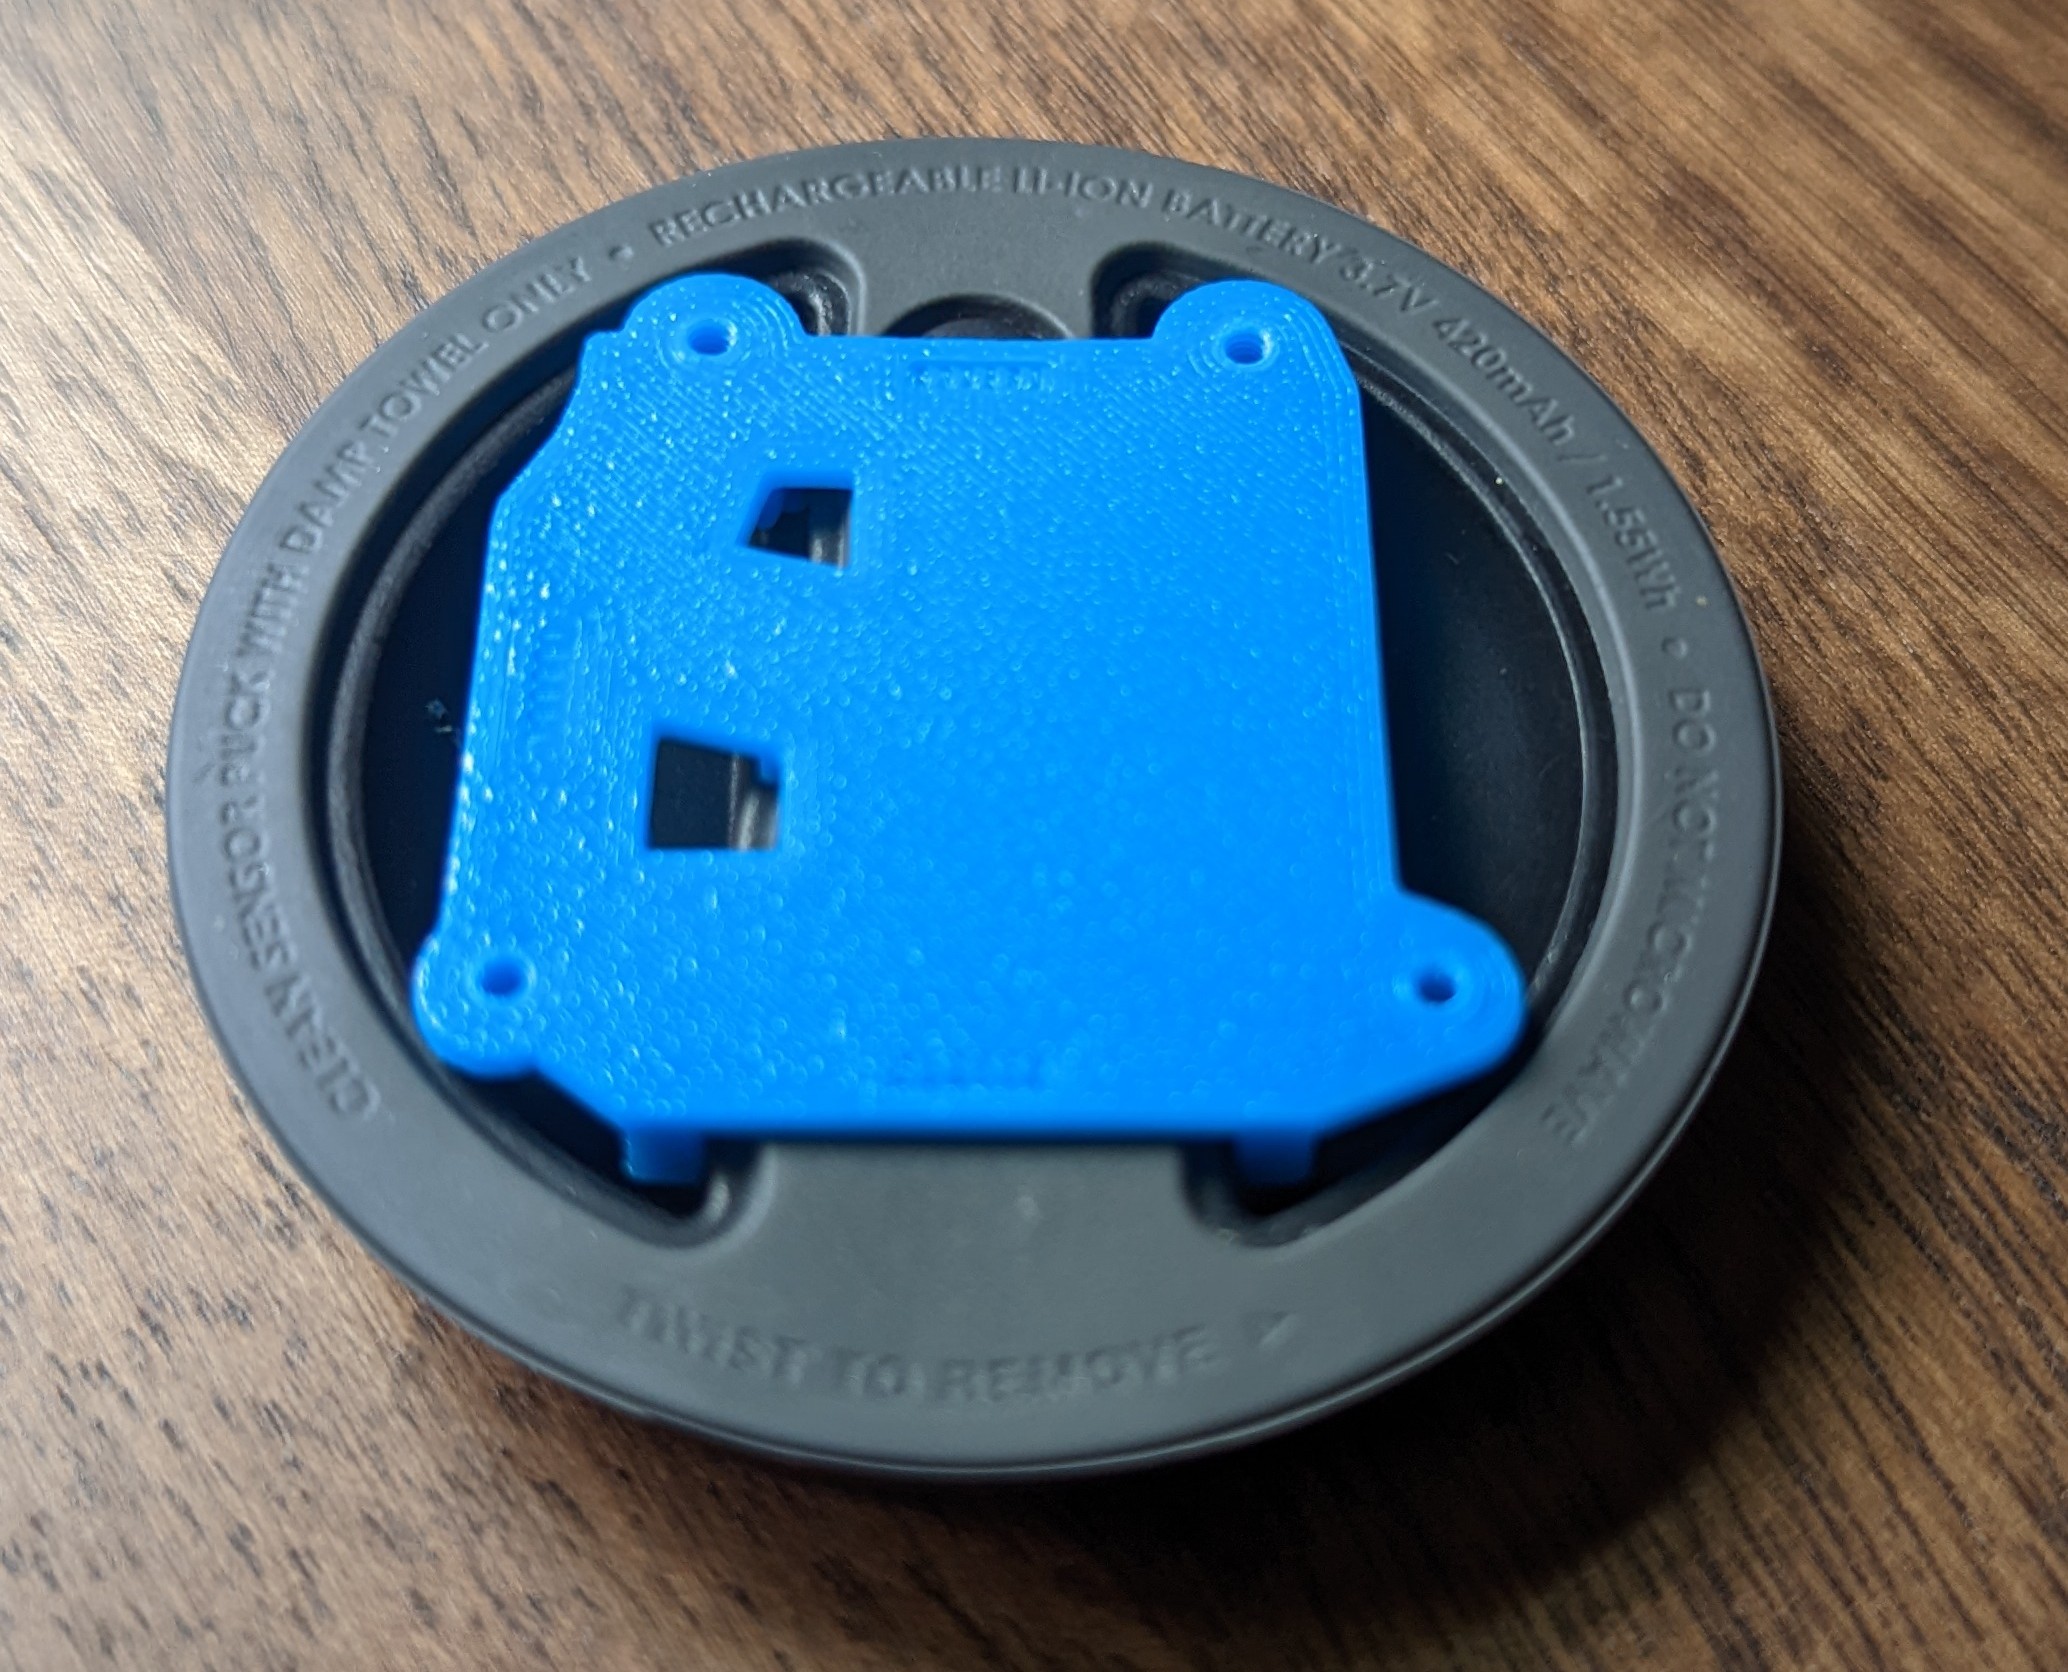 test fit the anchor on the bottom of the sensor puck